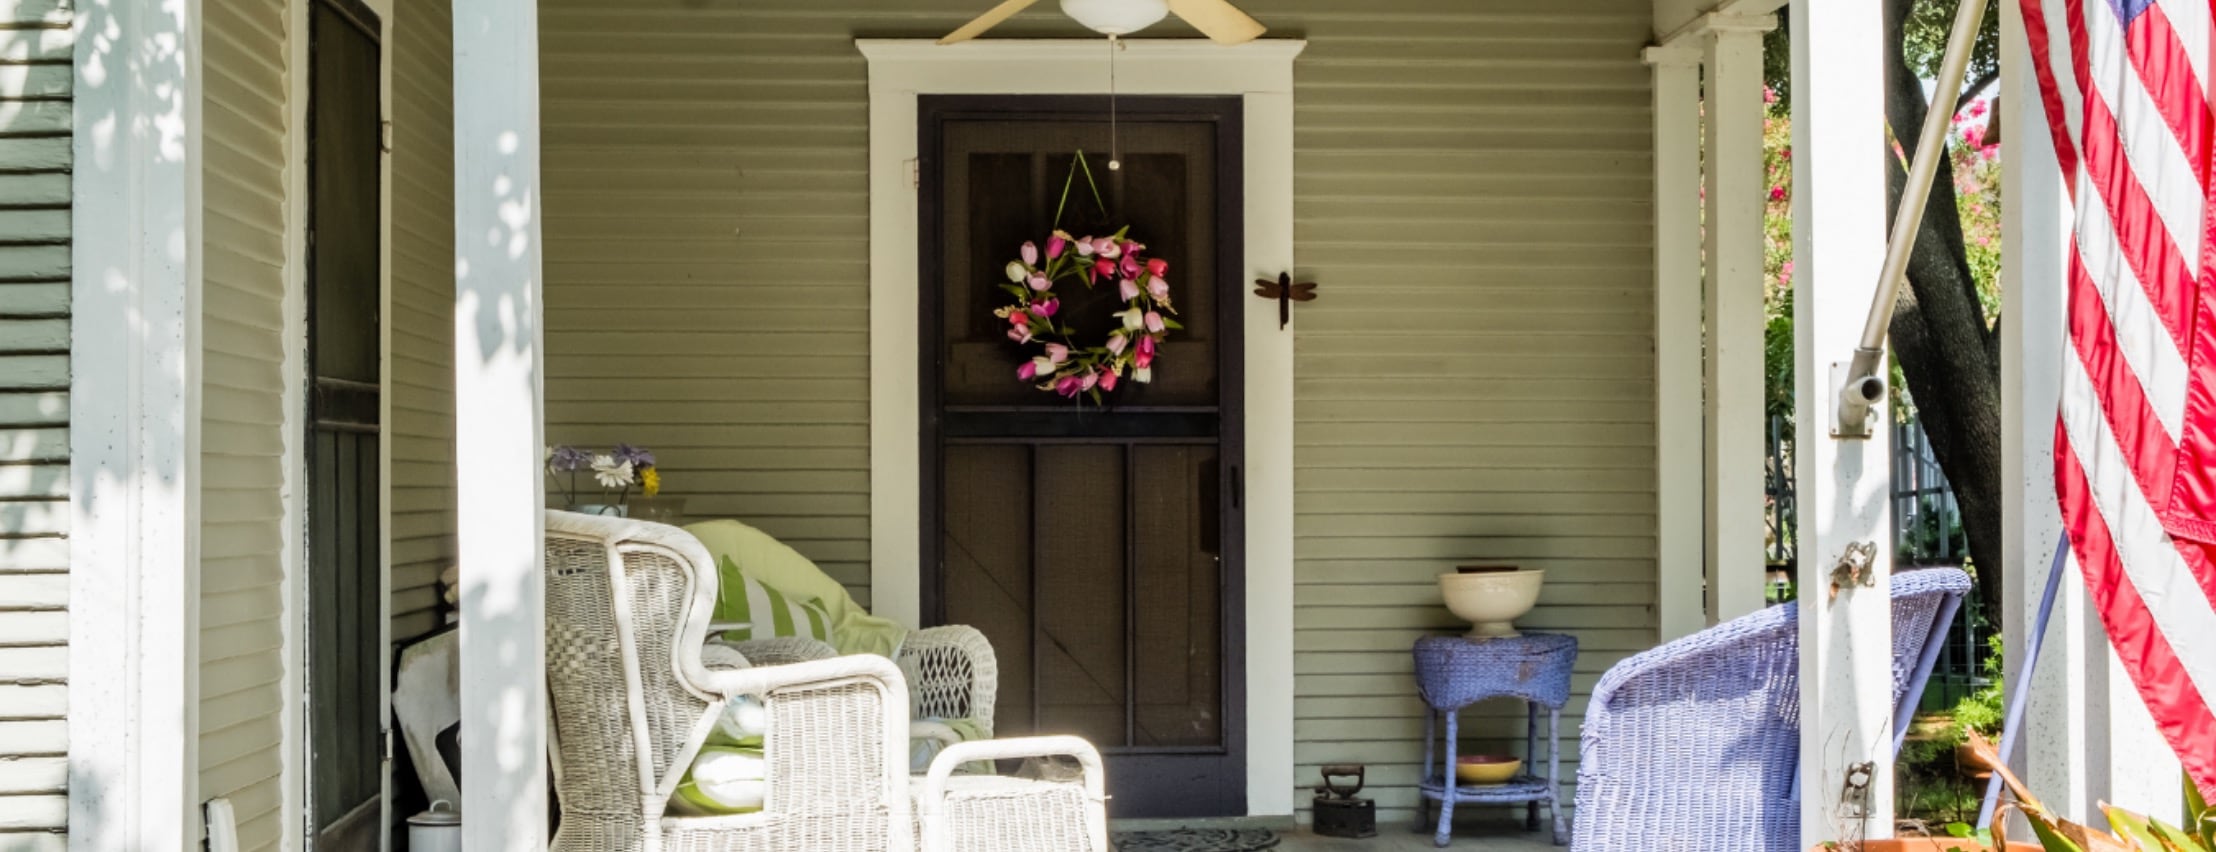 A southern front porch decorated with white wicker furniture an american flag and a wreath on the door